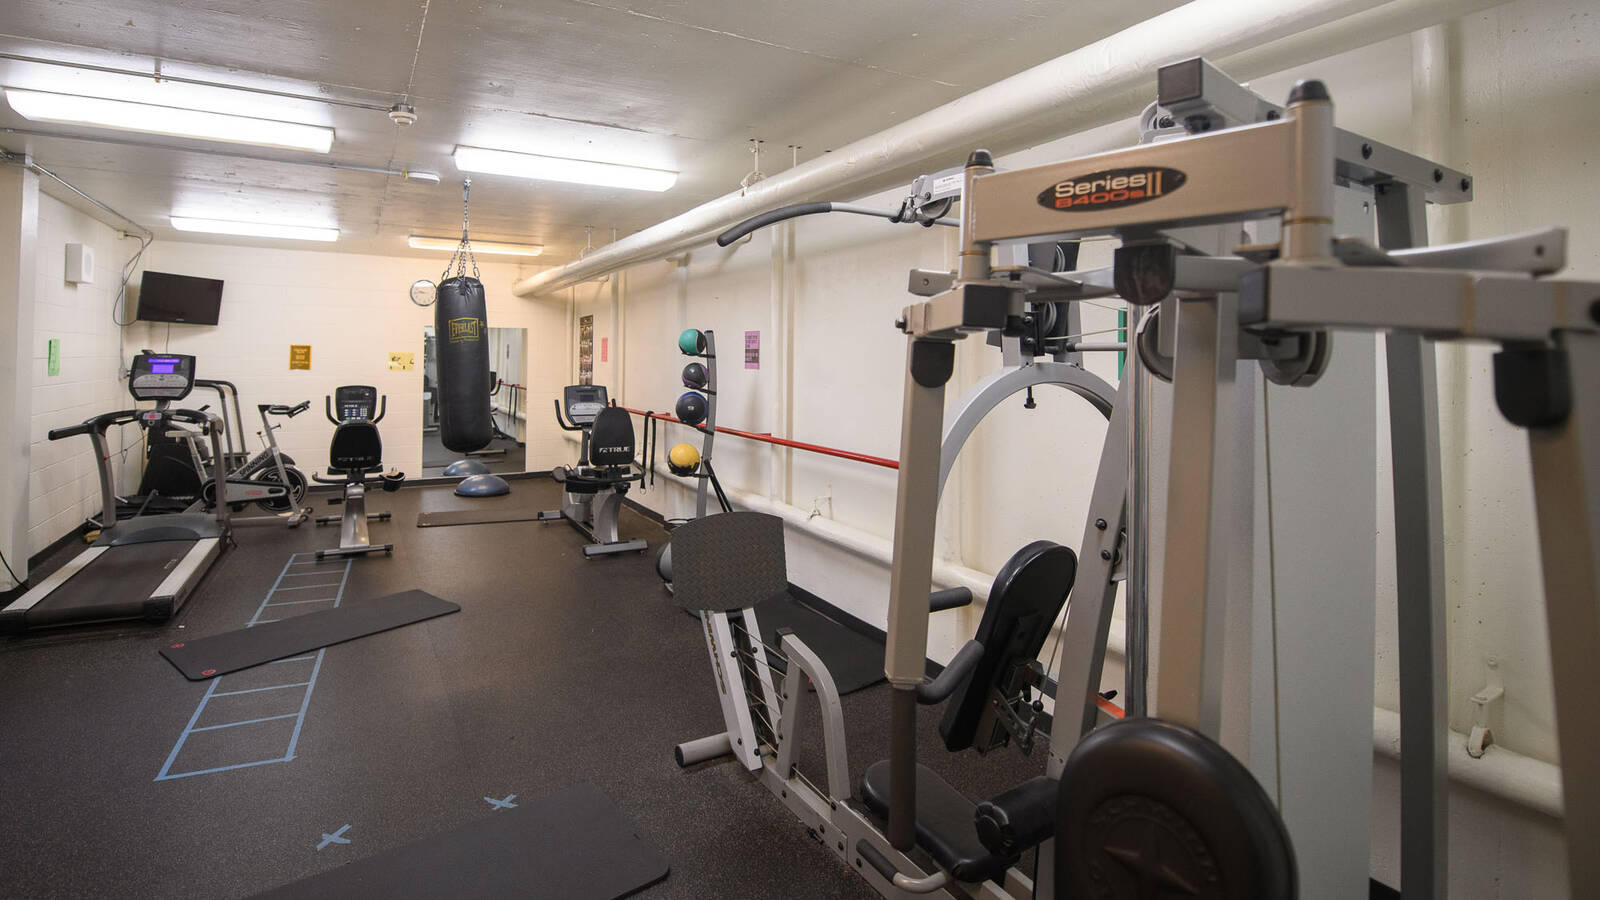 Fitness room in Governors Hall with treadmill, stationary bikes, stair stepper, punching bag, exercise mats, cable machines, and medicine balls.